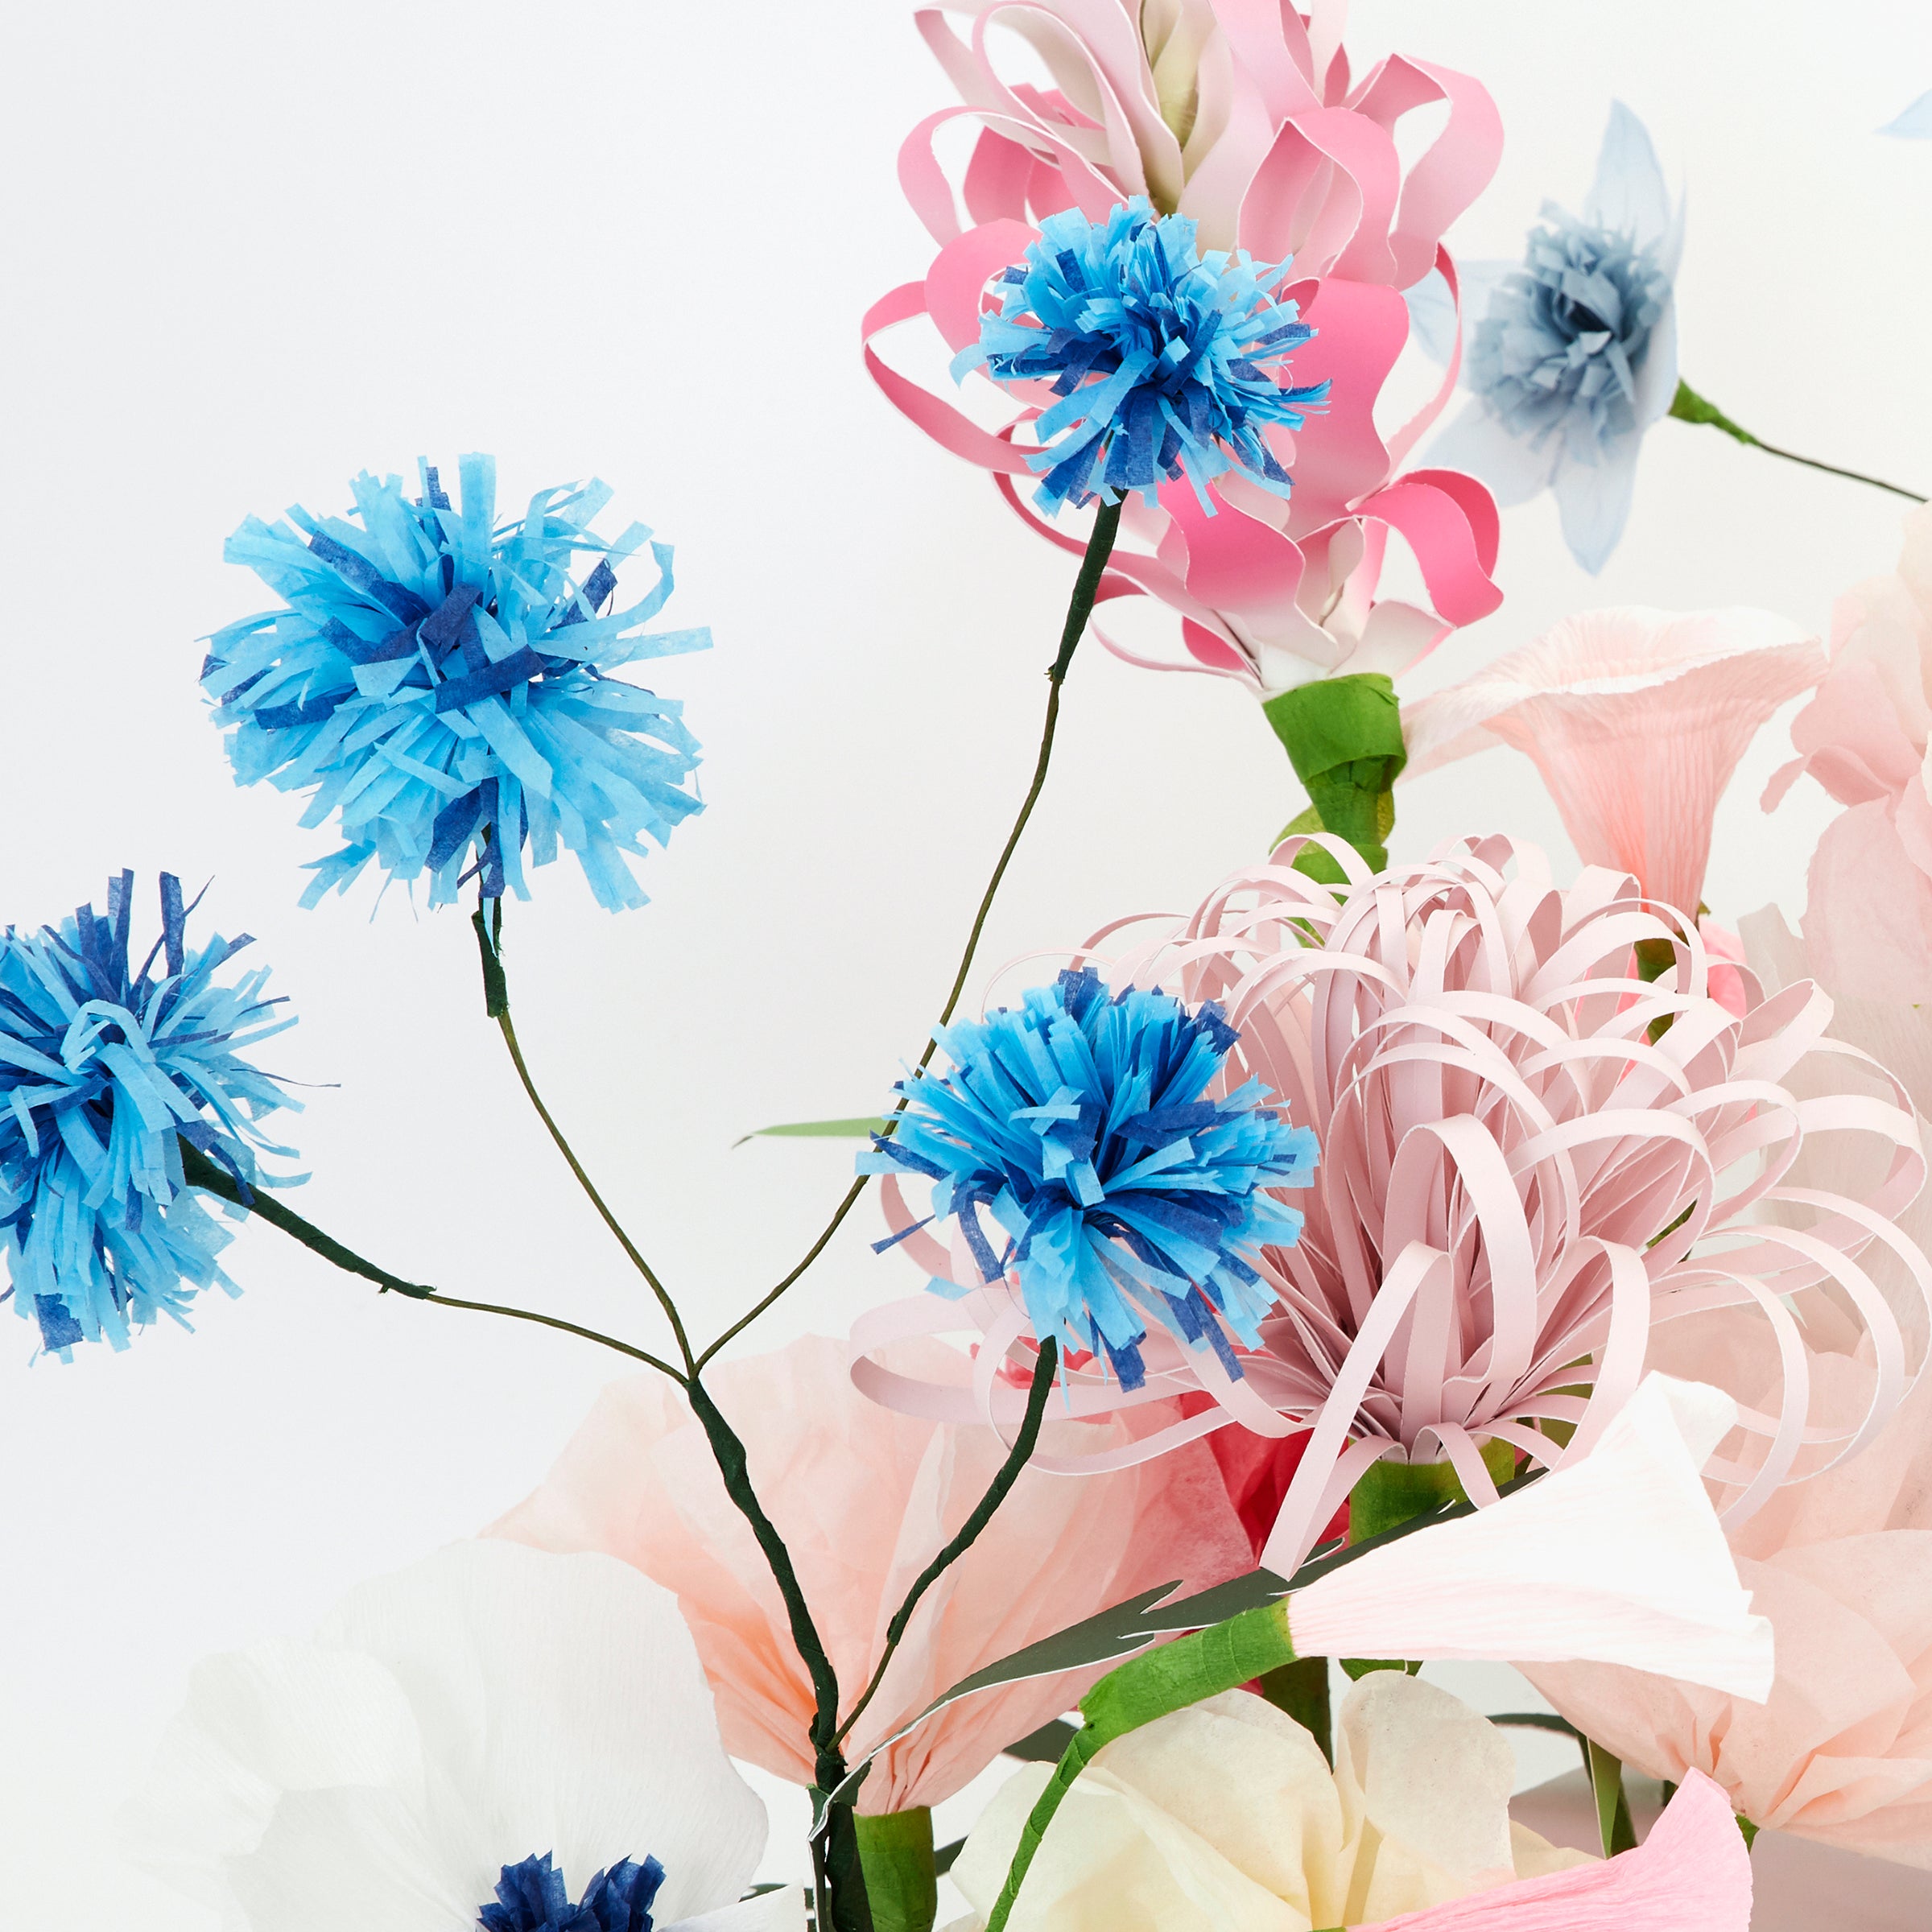 Our beautiful summer table decoration is crafted with stunning paper flowers and leaves.